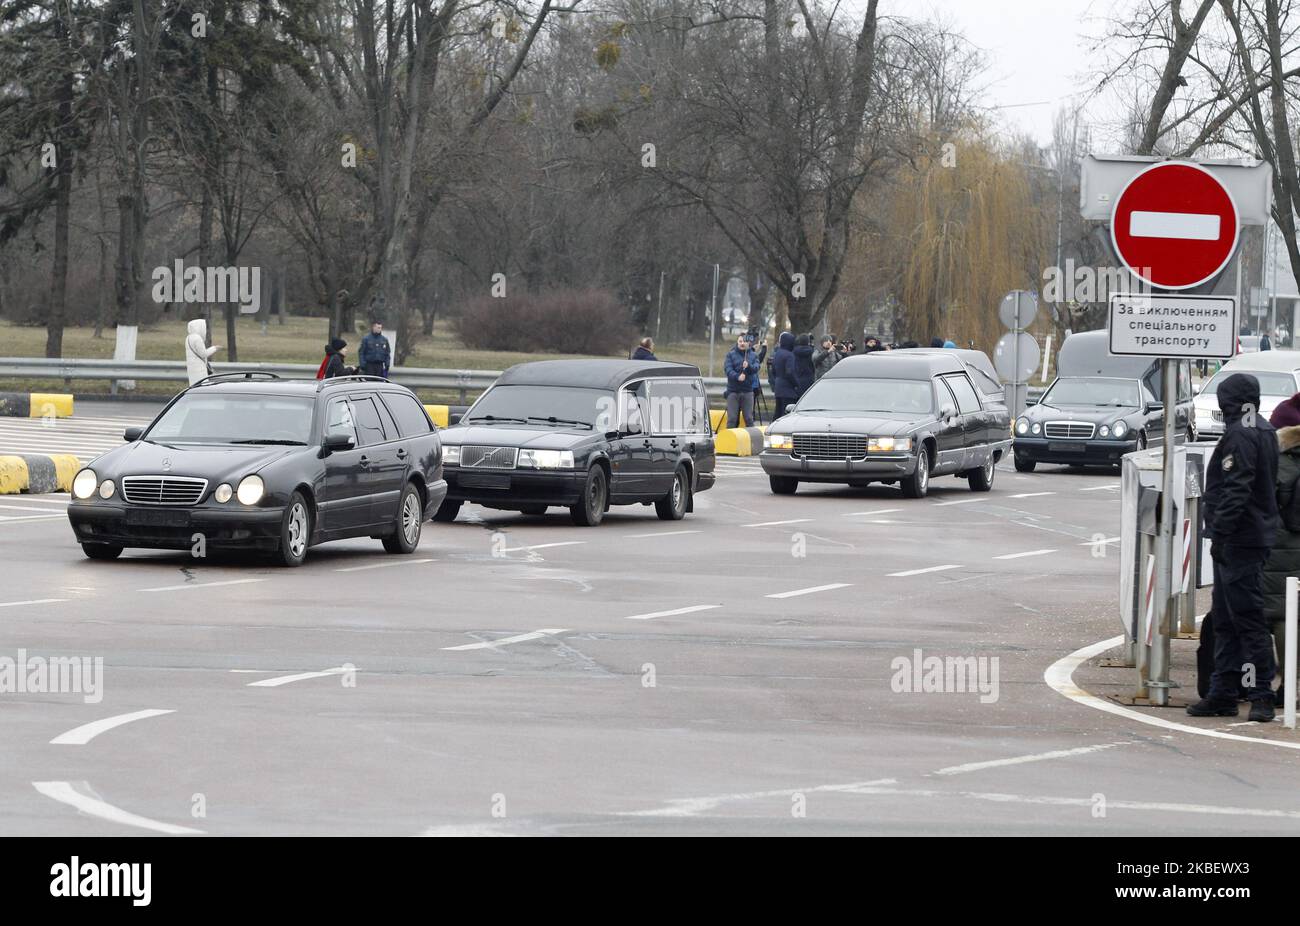 A motorcade of hearses with the bodies of Ukrainians, victims in the crash of the flight 752 of the Ukraine International Airlines in Iran, are seen upon arrival to the Boryspil Airport near Kiev, Ukraine, on 19 January, 2020. The bodies of Ukrainians, 9 crew members of the Ukraine International Airlines (UIA) and 2 passengers, dead the plane crash in Iran, were handed over from Iran to Ukraine. (Photo by STR/NurPhoto) Stock Photo